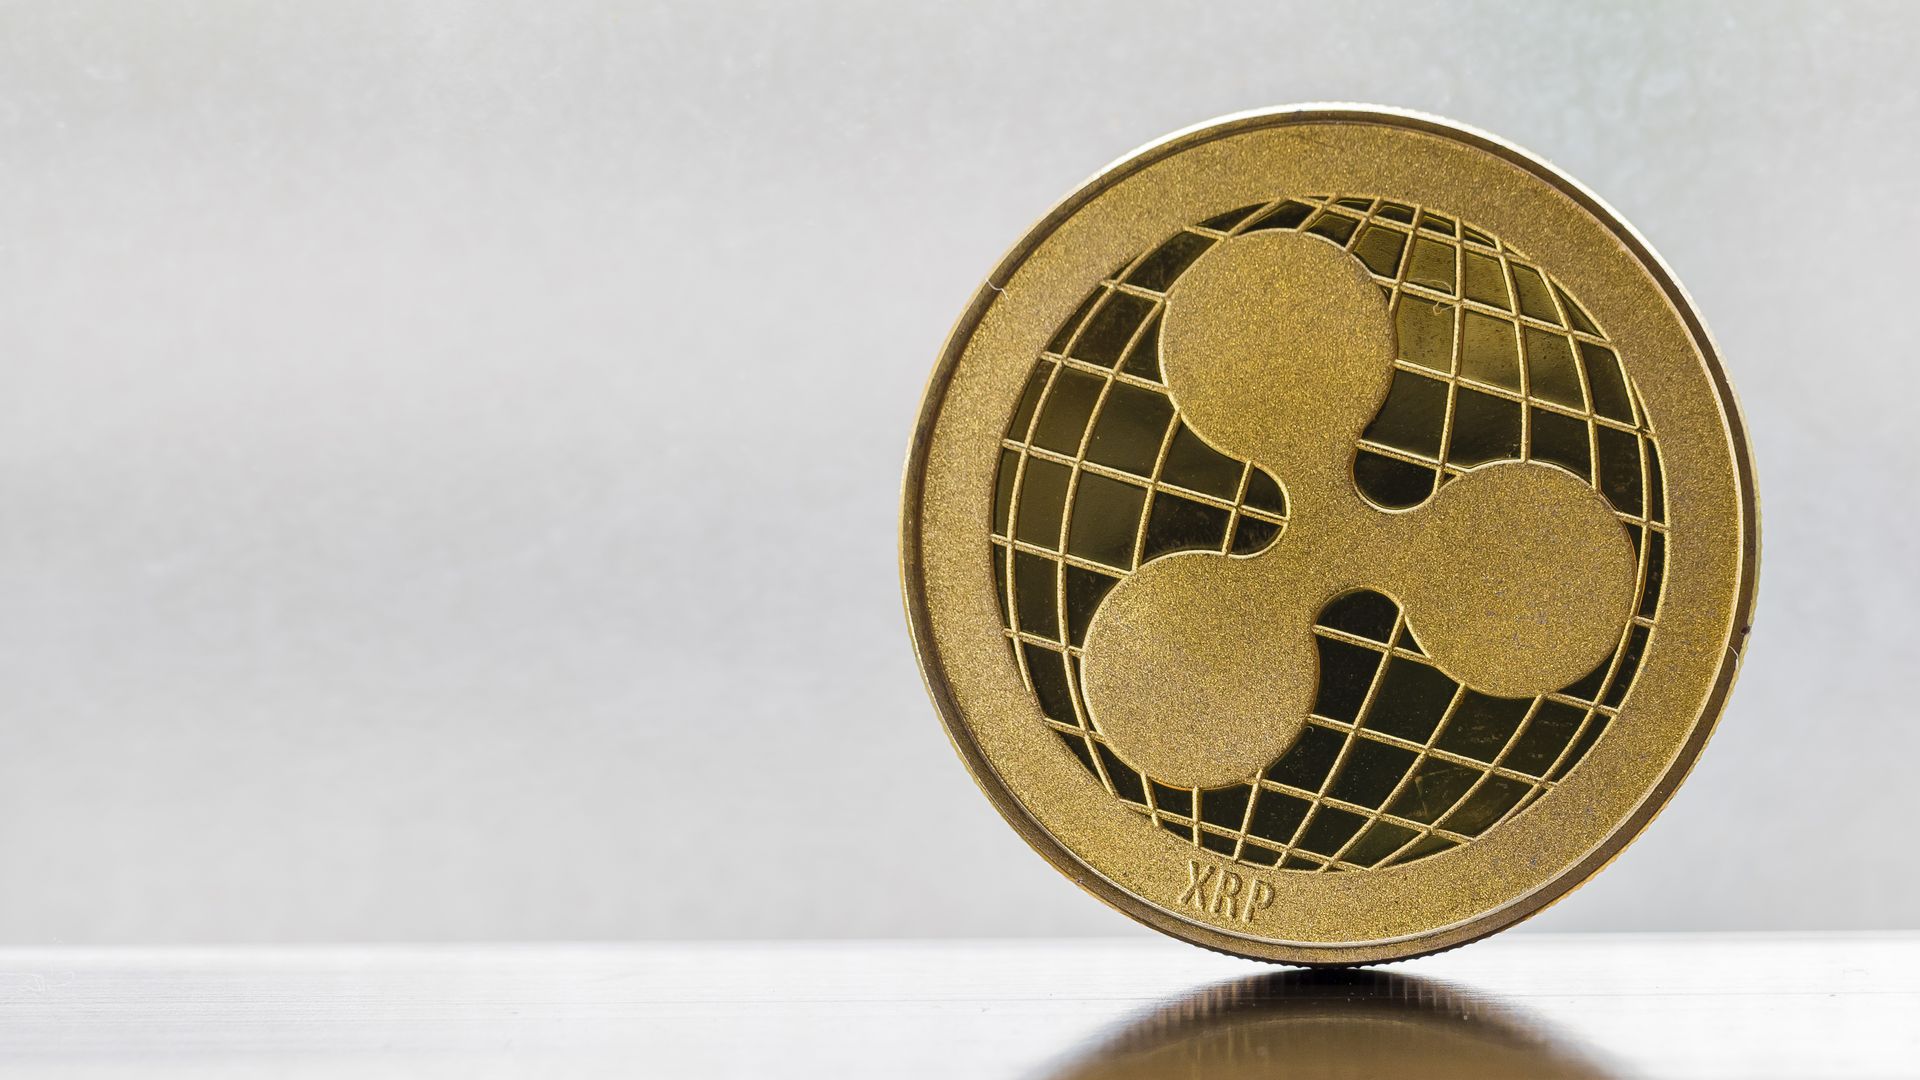 Coin with Ripple's XRP digital currency logo.